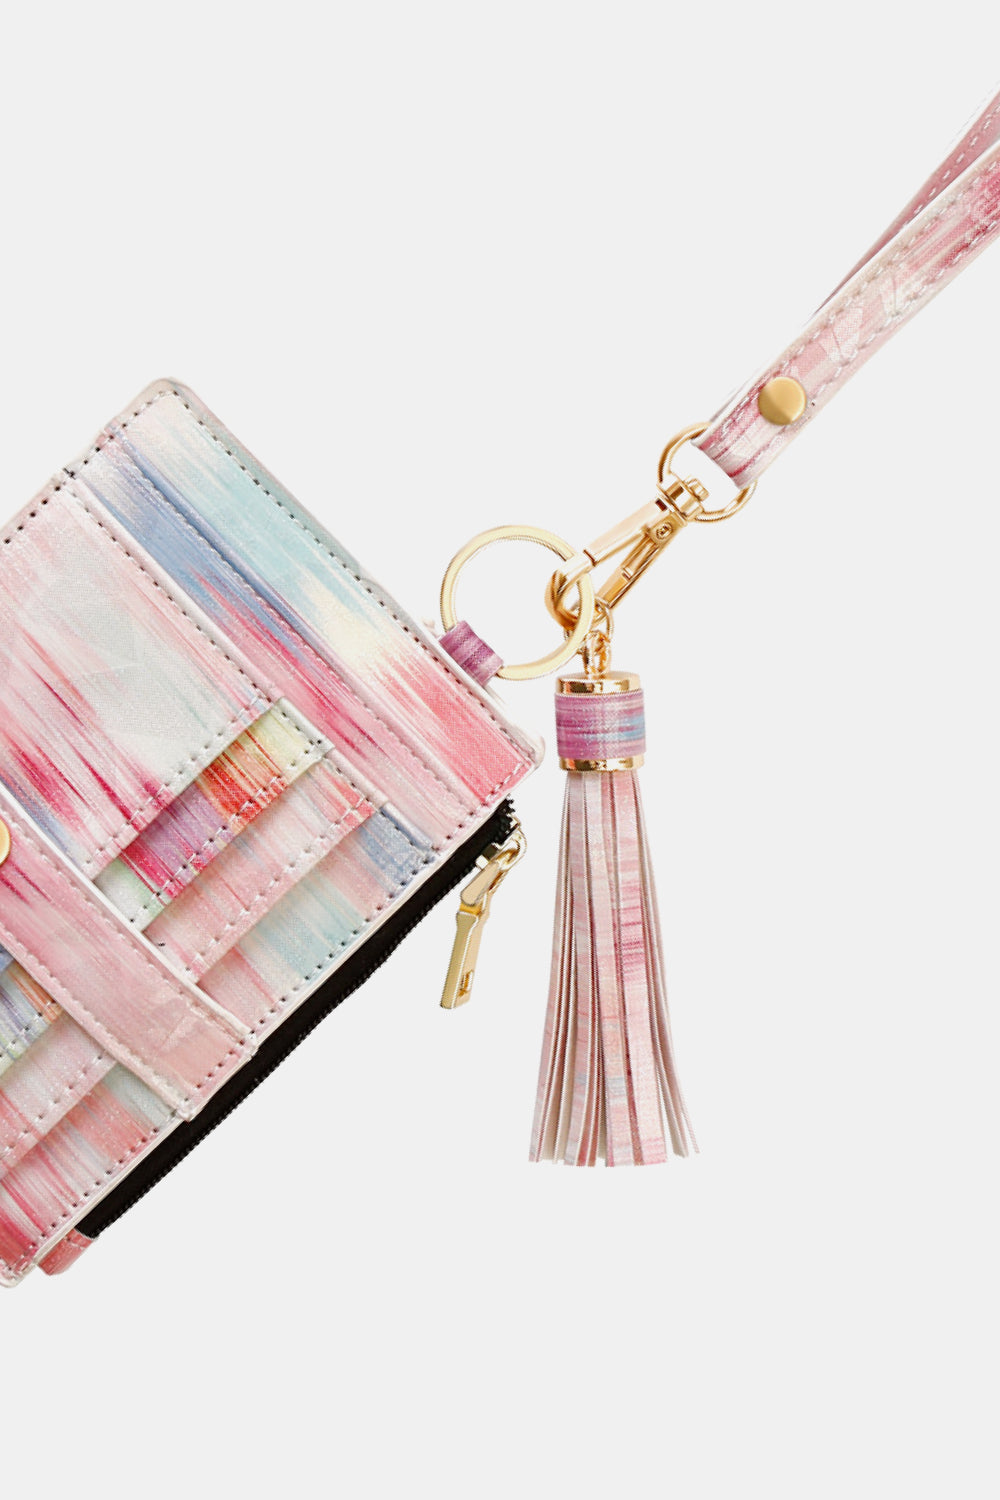 Trendsi Cupid Beauty Supplies Keychains Printed Tassel Keychain with Wallet